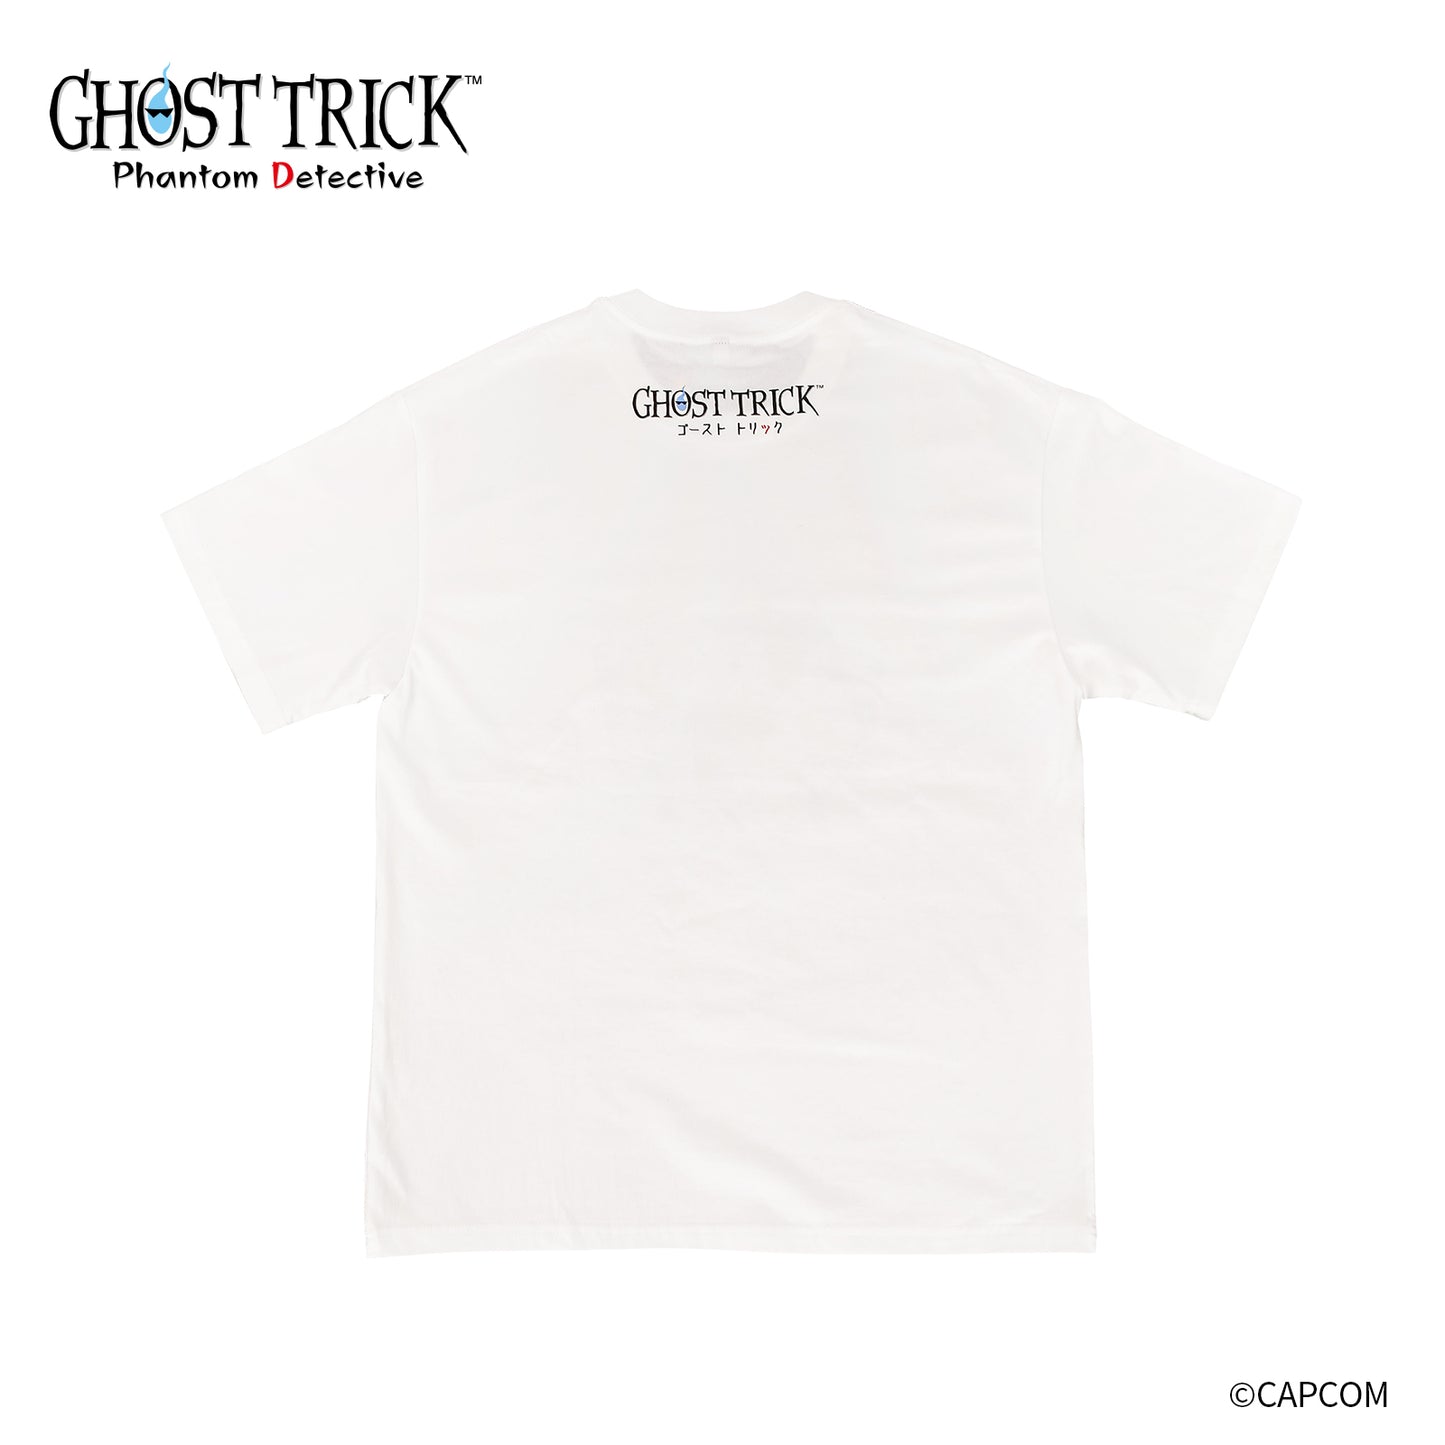 Ghost Trick White T-shirt